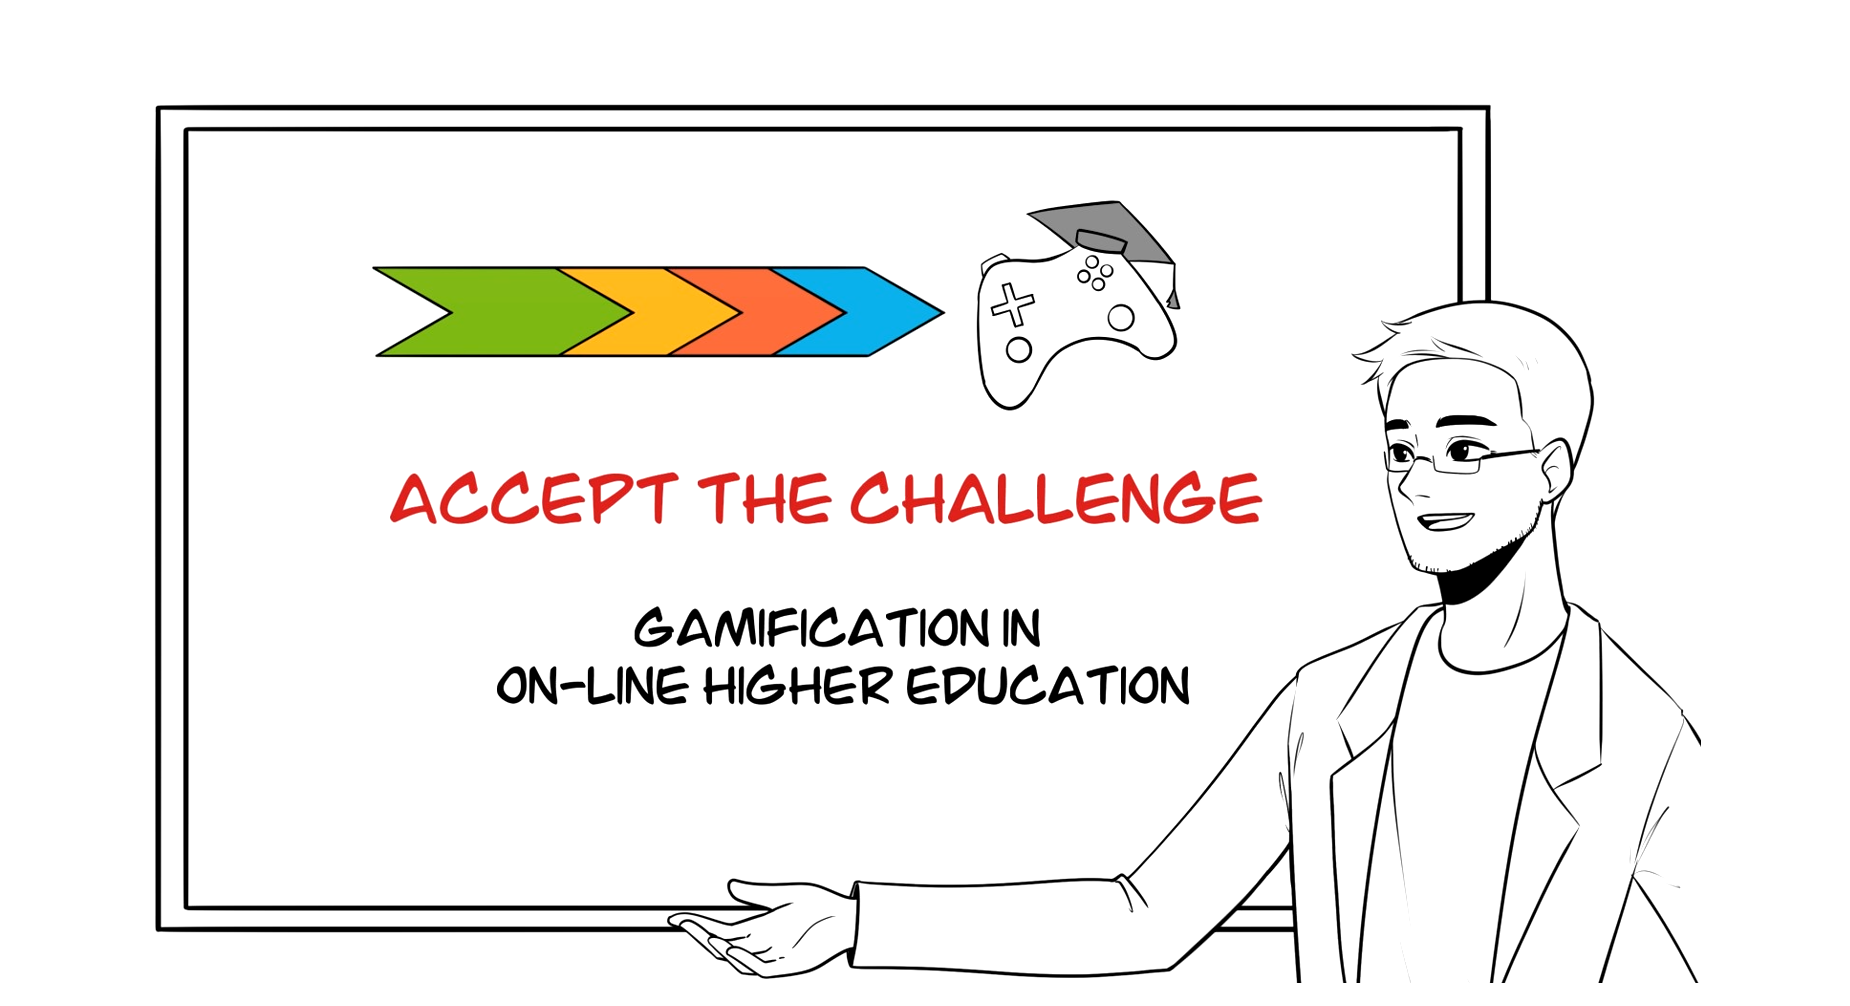 ACCEPT THE CHALLENGE! – Gamification IN on-line higher EDucaton